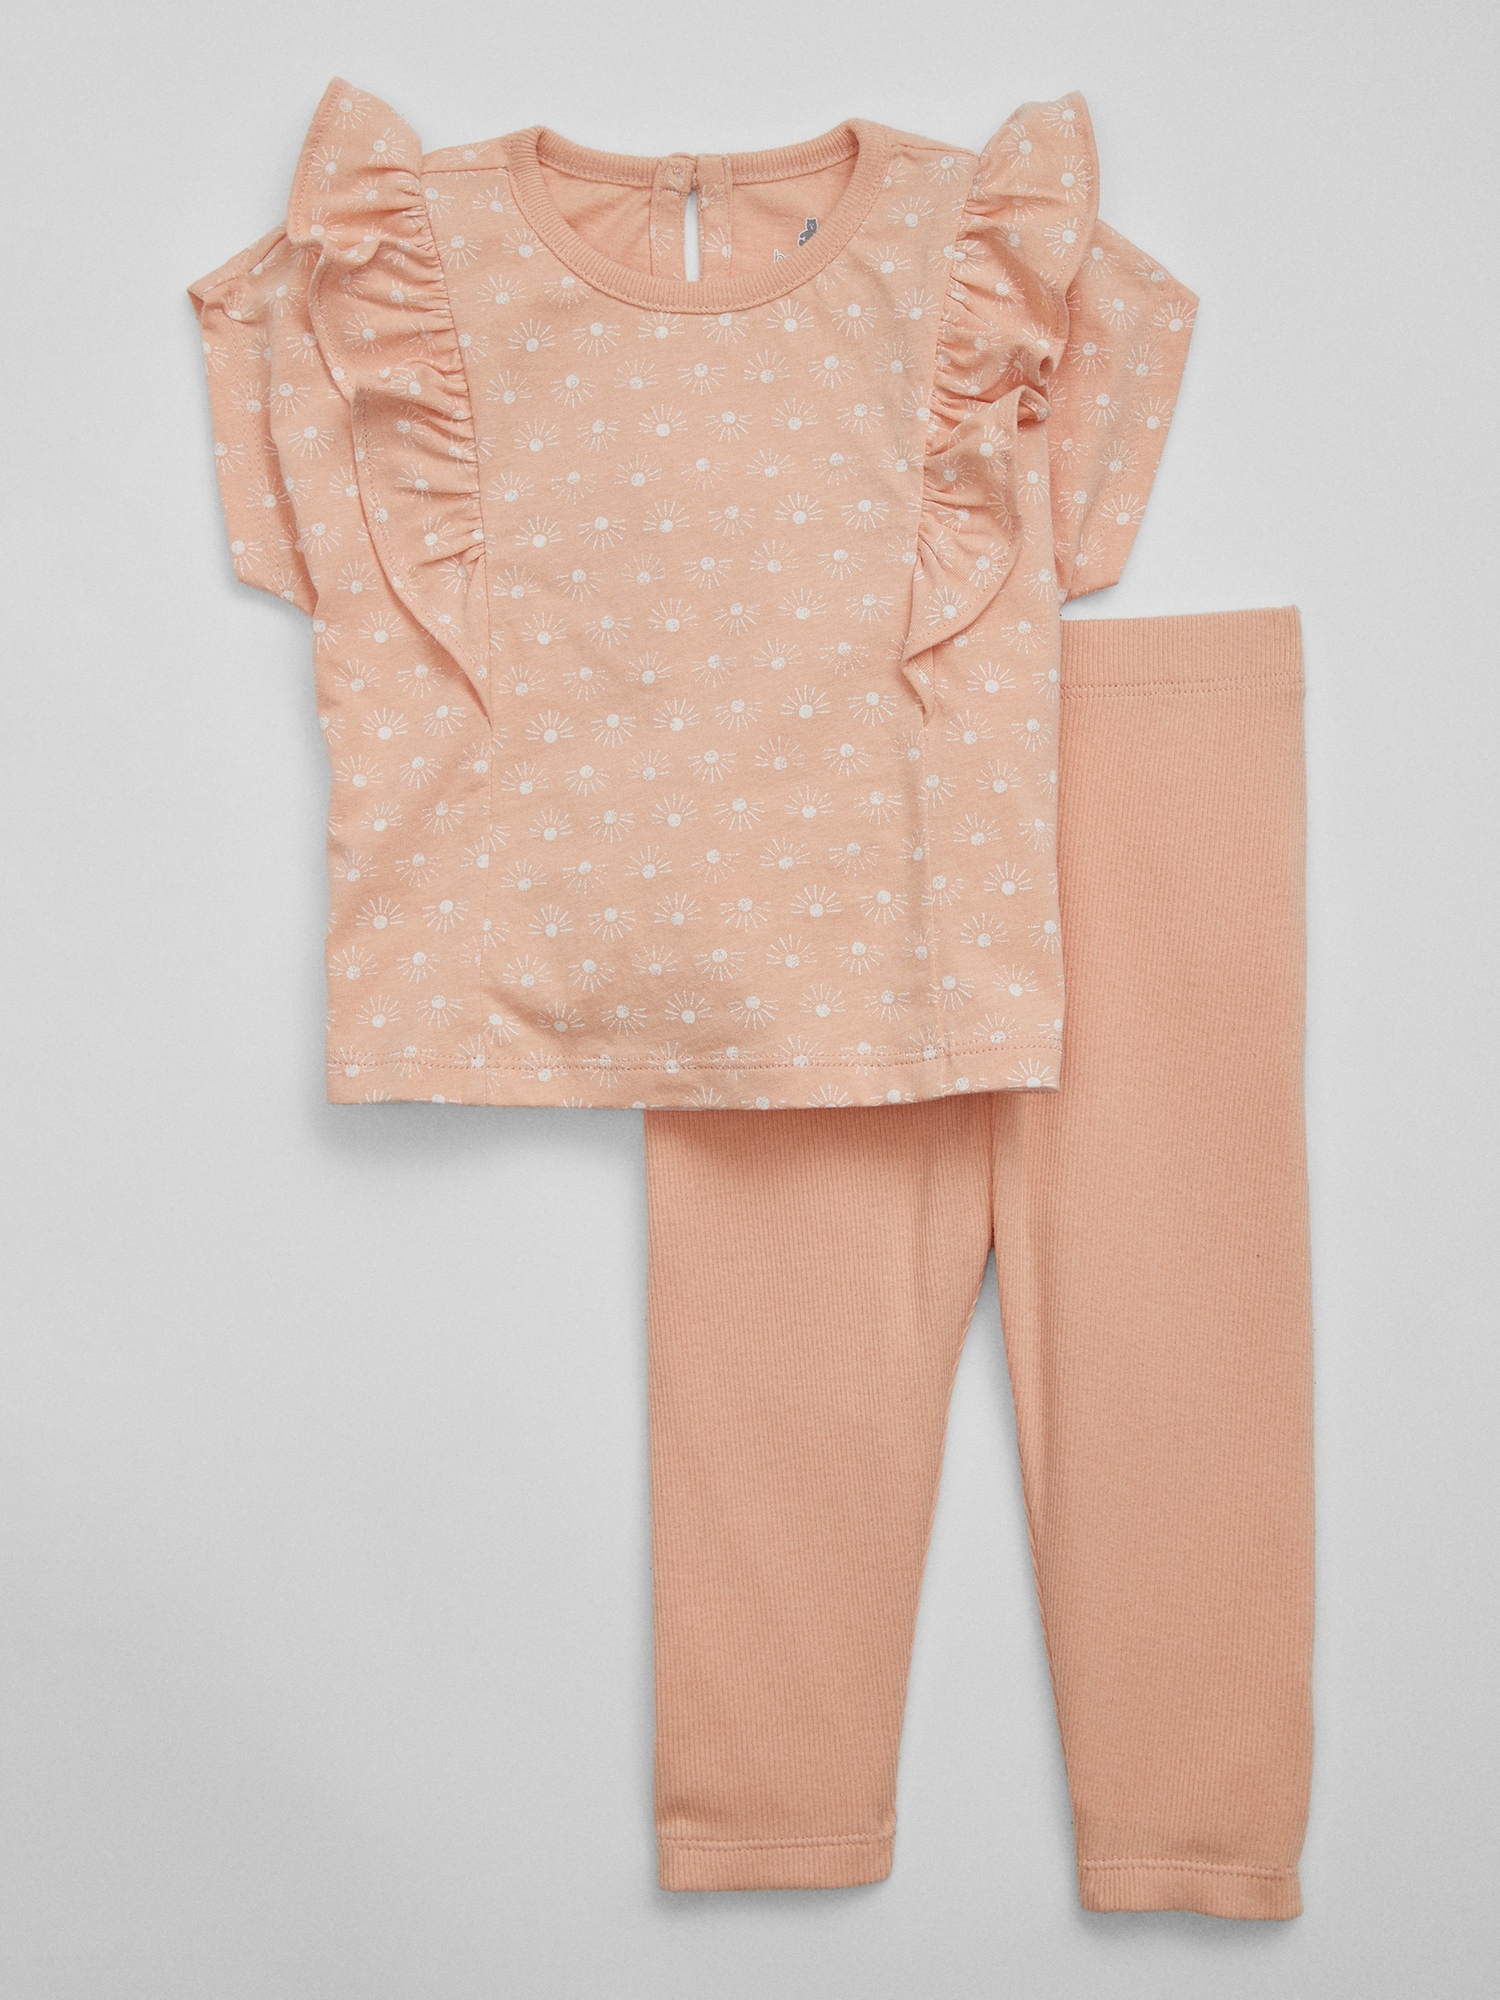 Baby Ribbed Legging Two-Piece Outfit Set